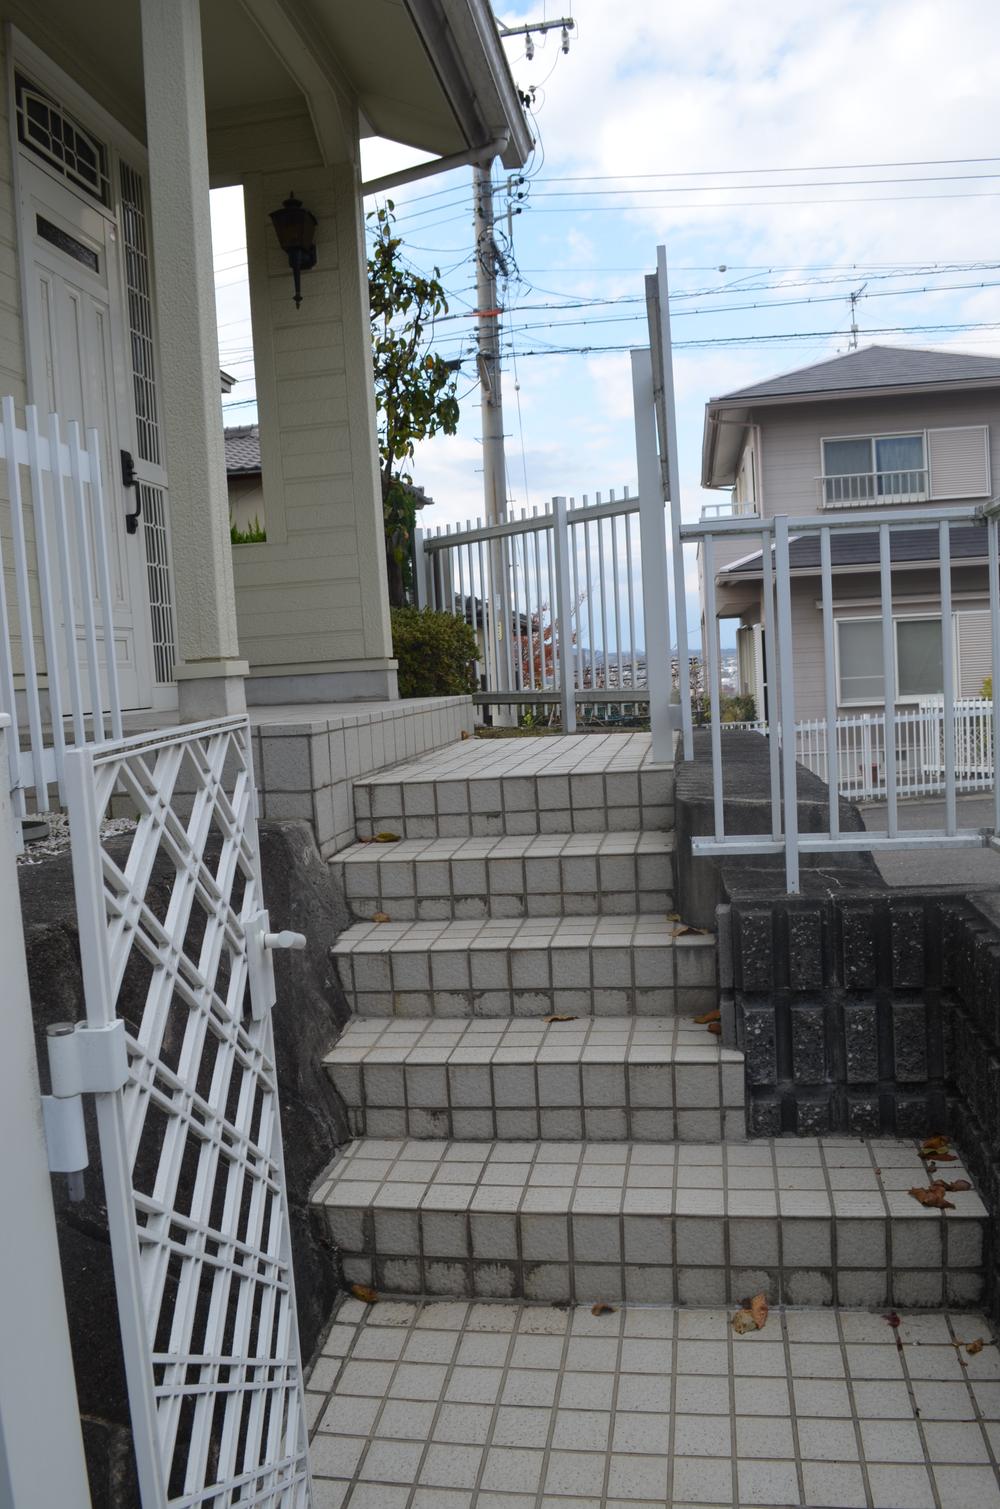 Local appearance photo. Entrance before the stairs (11 May 2015) Shooting